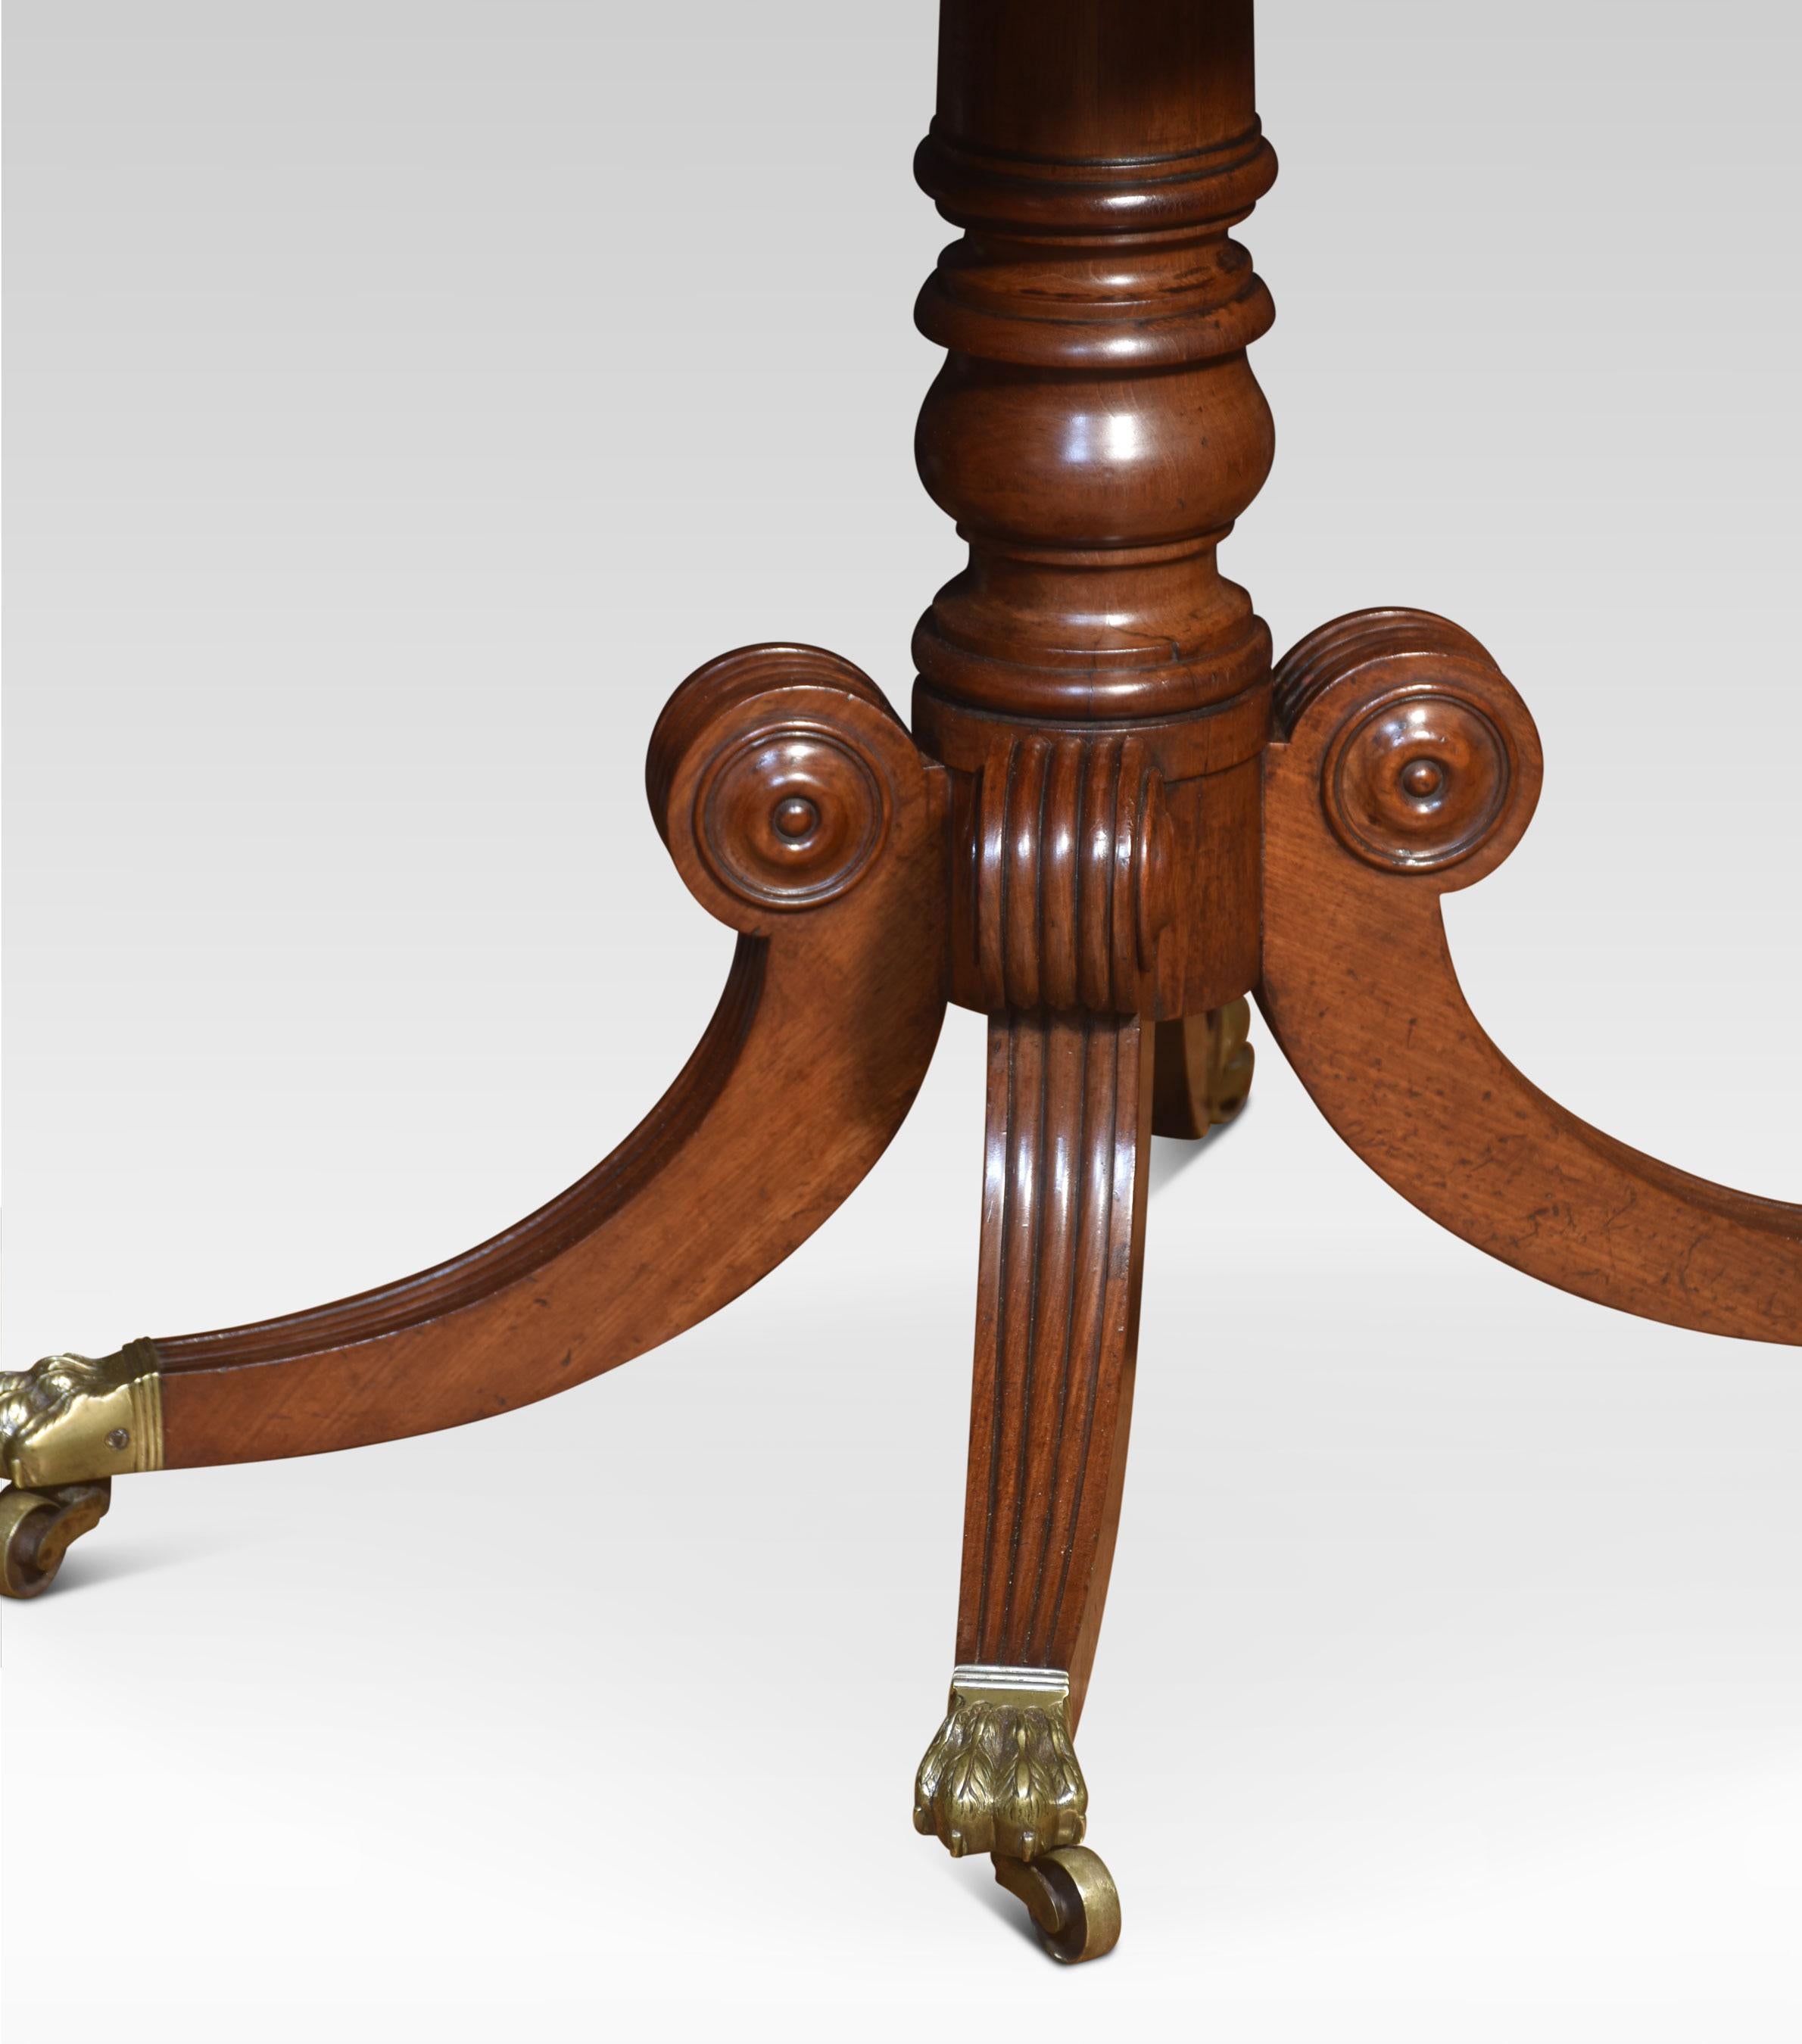 Pair of Regency hall tables, the we’ll figured mahogany tops supported on turned columns. All raised up on four sabre legs, terminating in brass paw feet and castors.
Dimensions
Height 28.5 Inches
Width 47.5 Inches
Depth 22.5 Inches